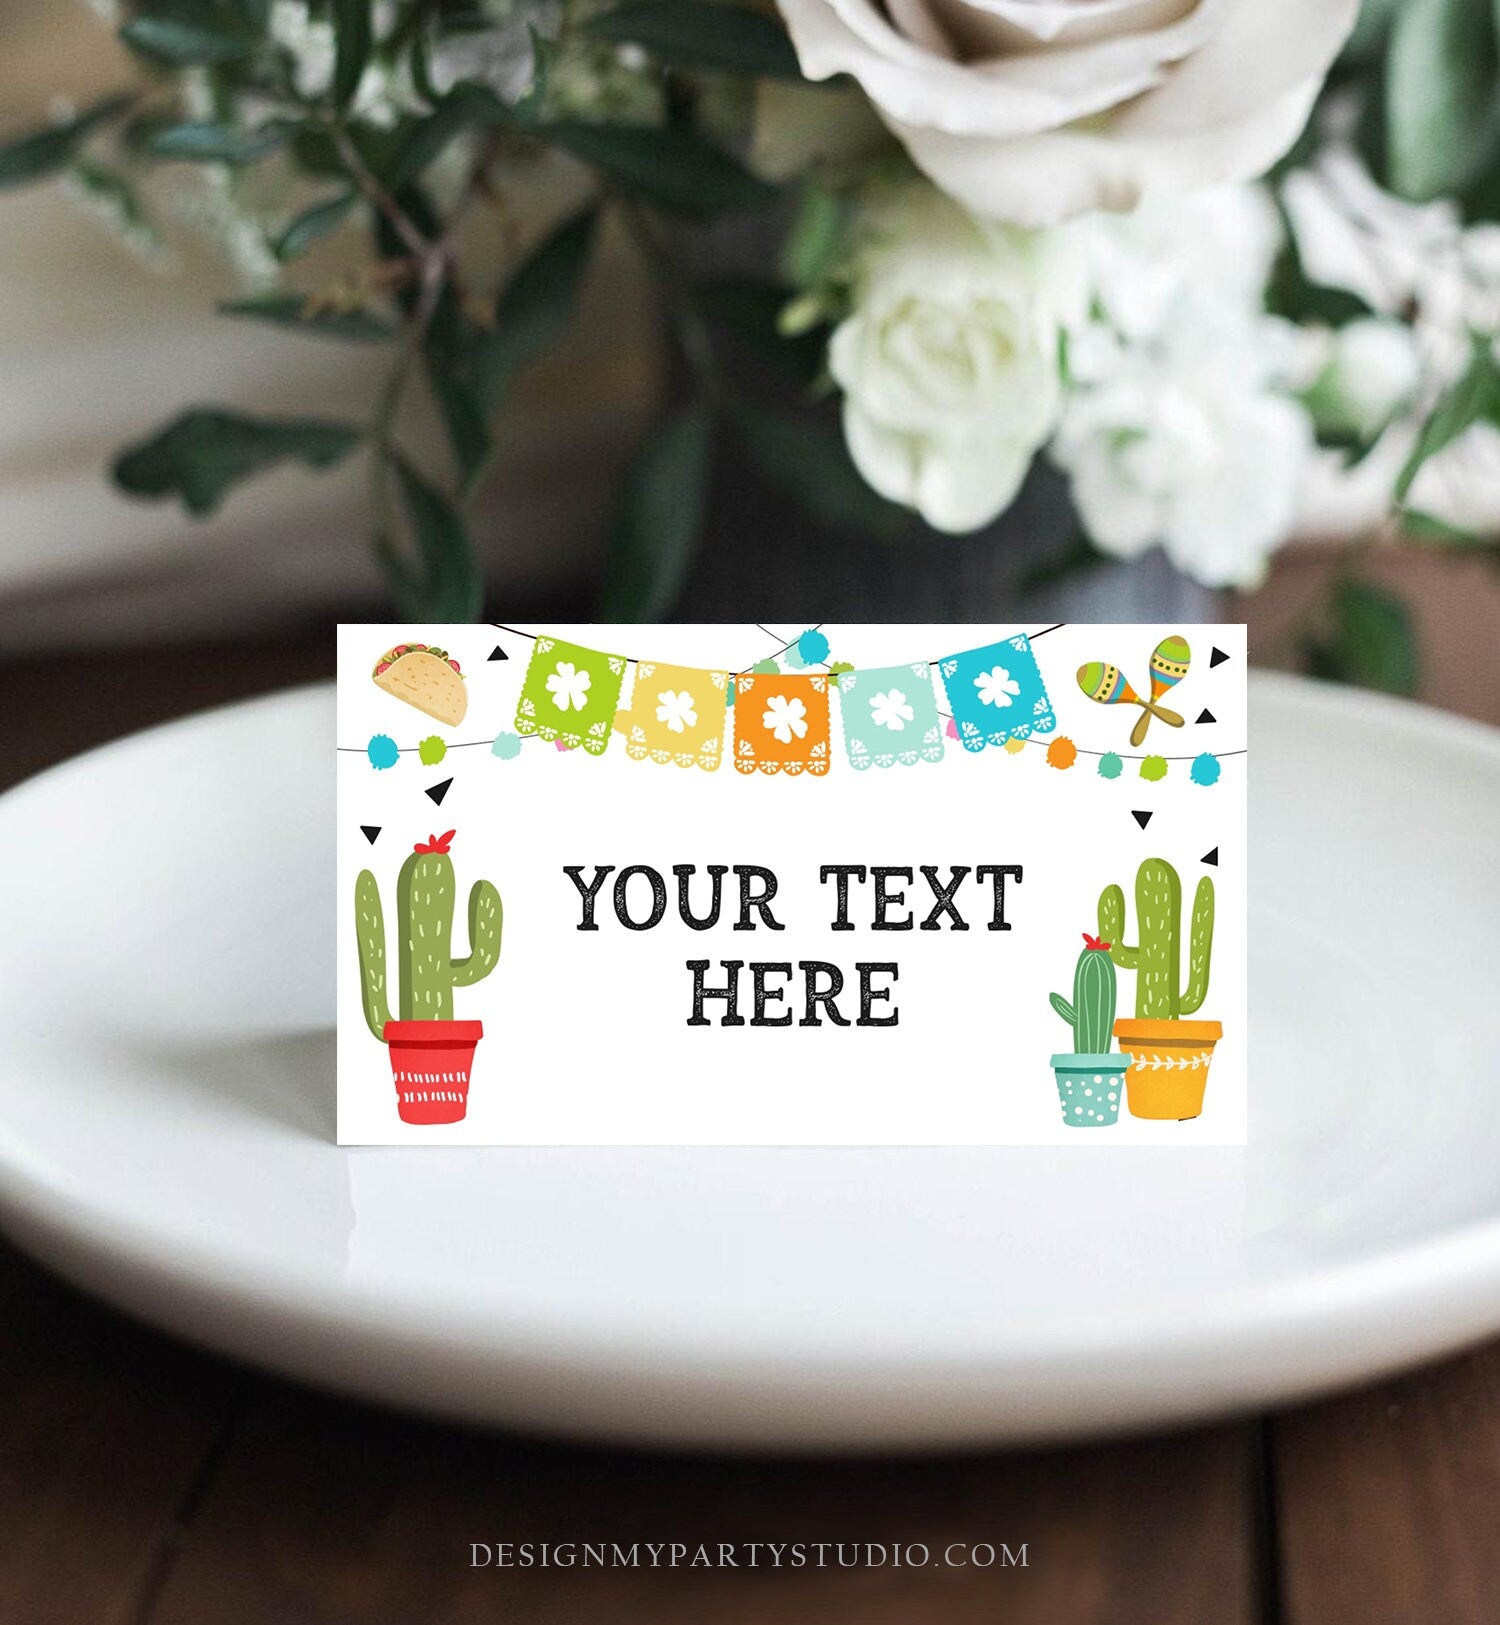 Editable Fiesta Taco Food Labels Fiesta Party Place Card Tent Card Birthday Baby Shower Mexican Fiesta Cactus Decor Corjl Template 0161